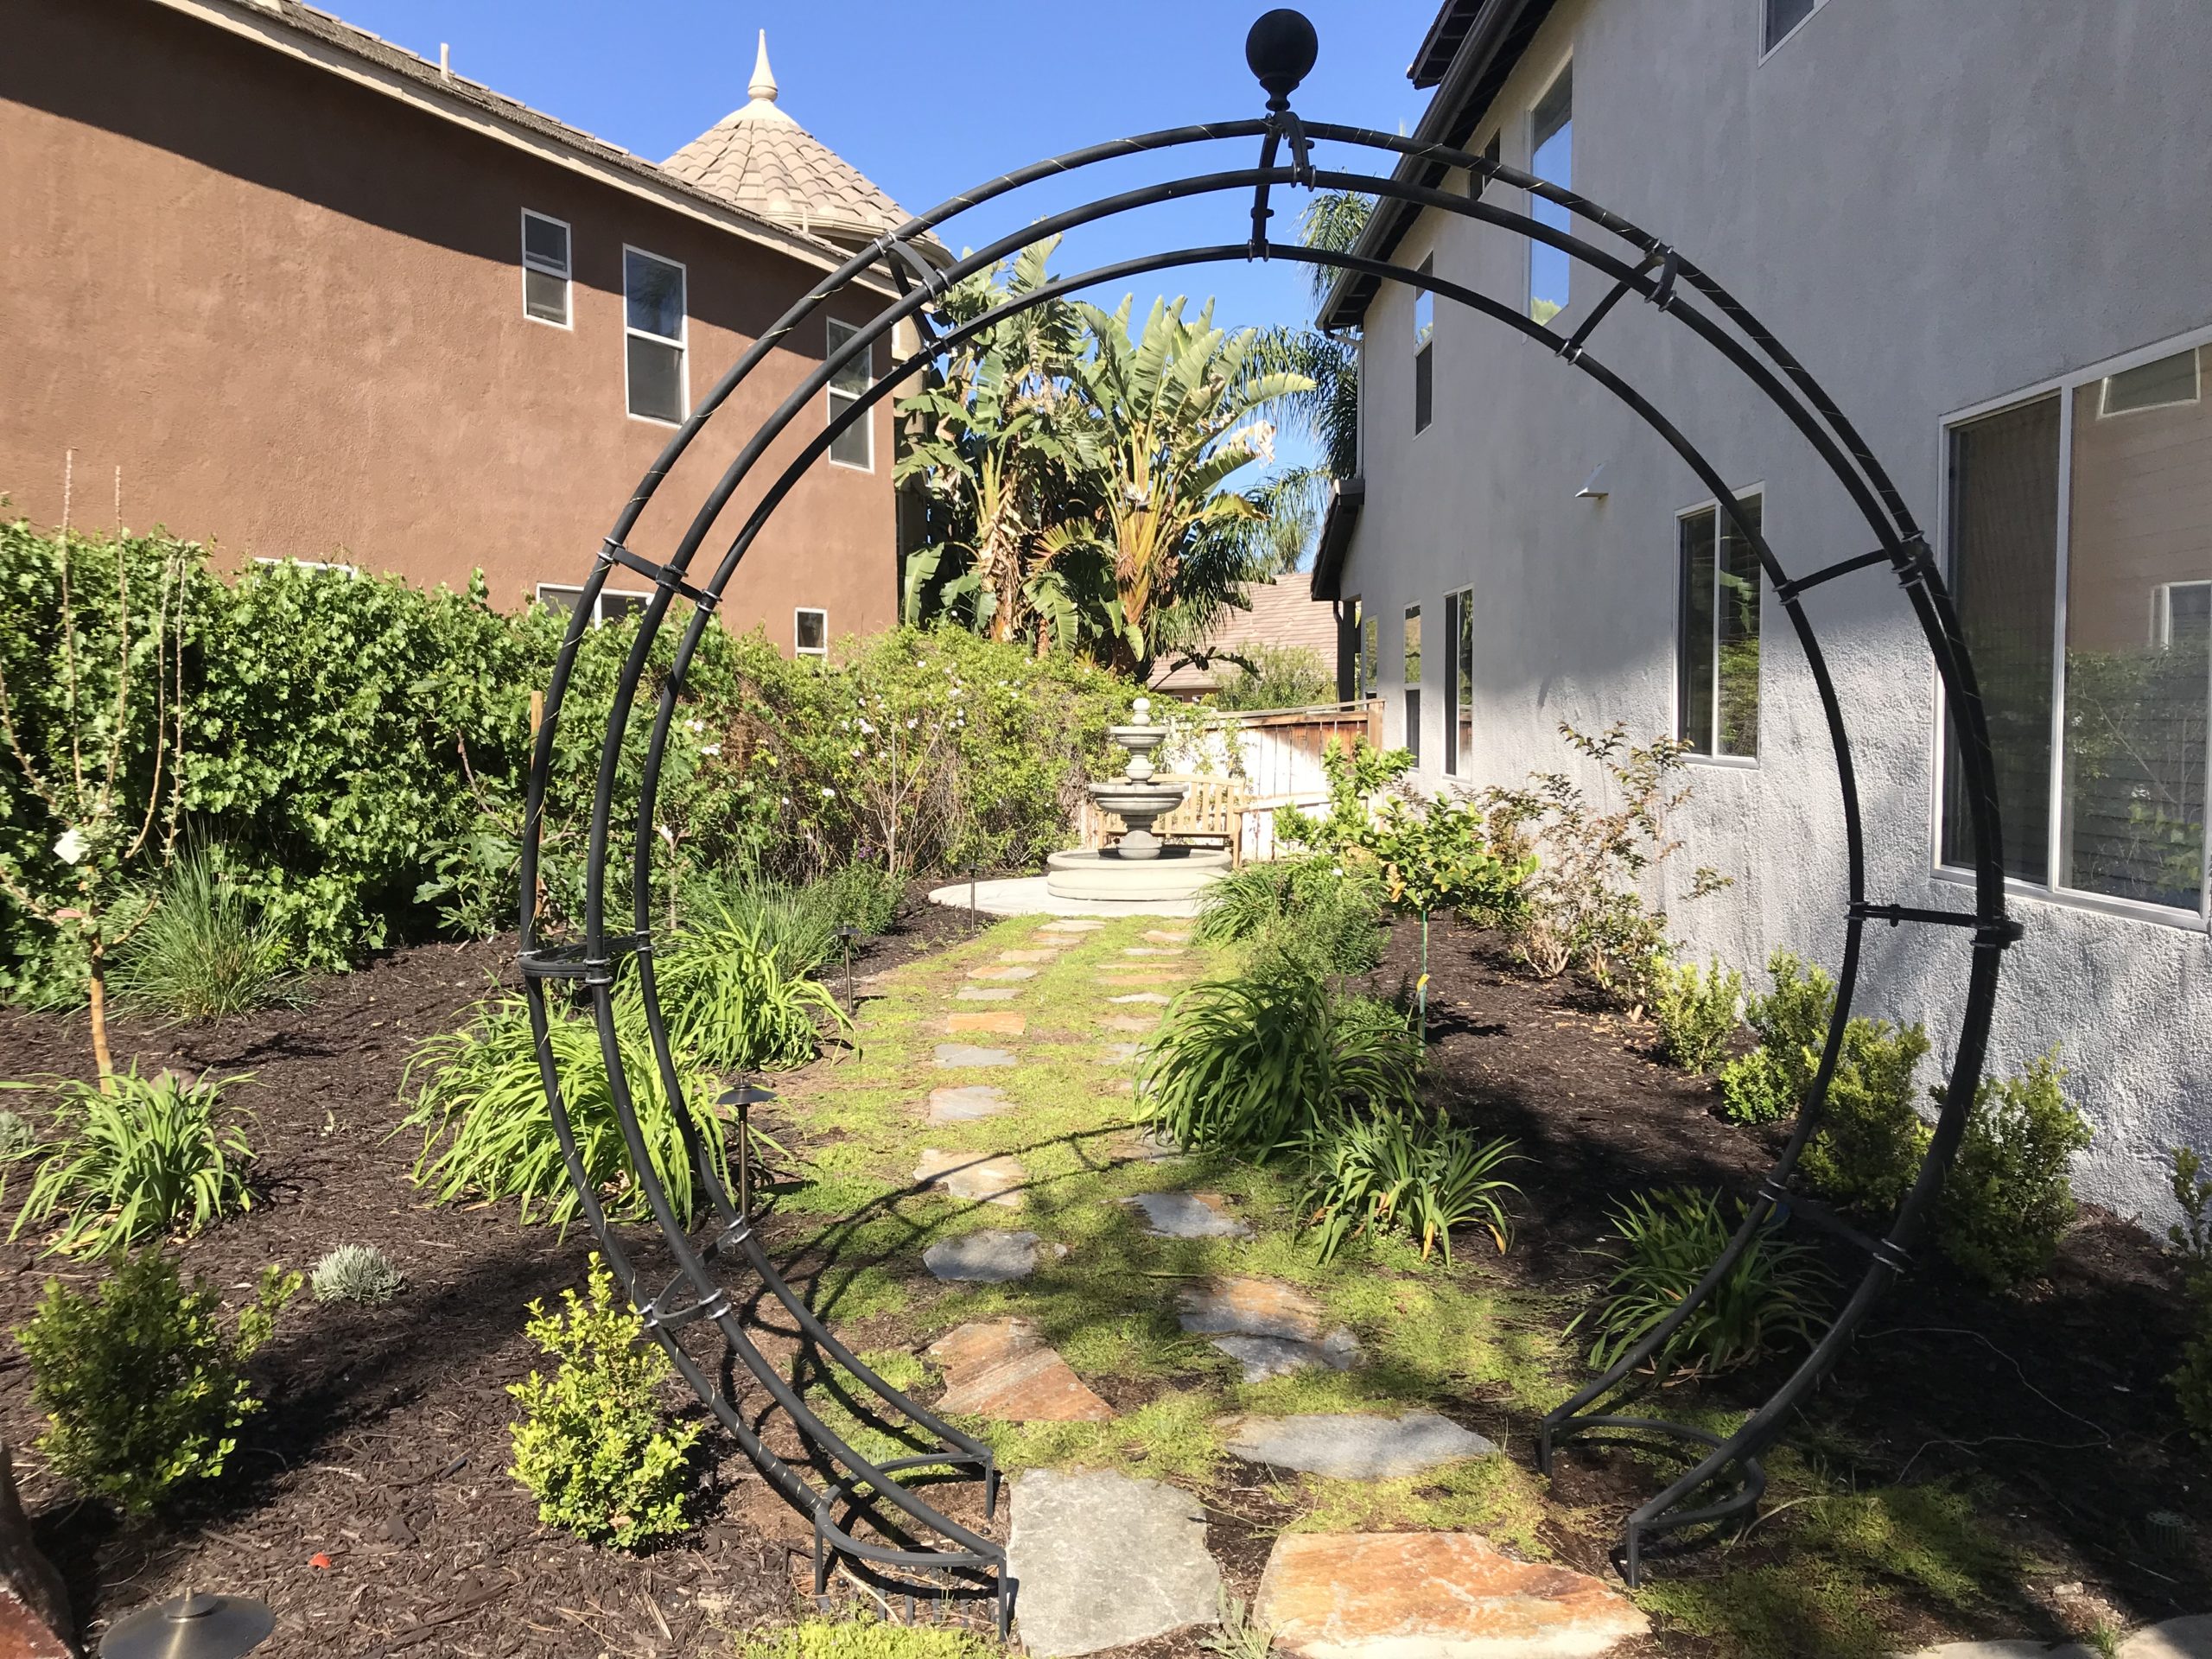 Moon gate - Garden archway into a seating area